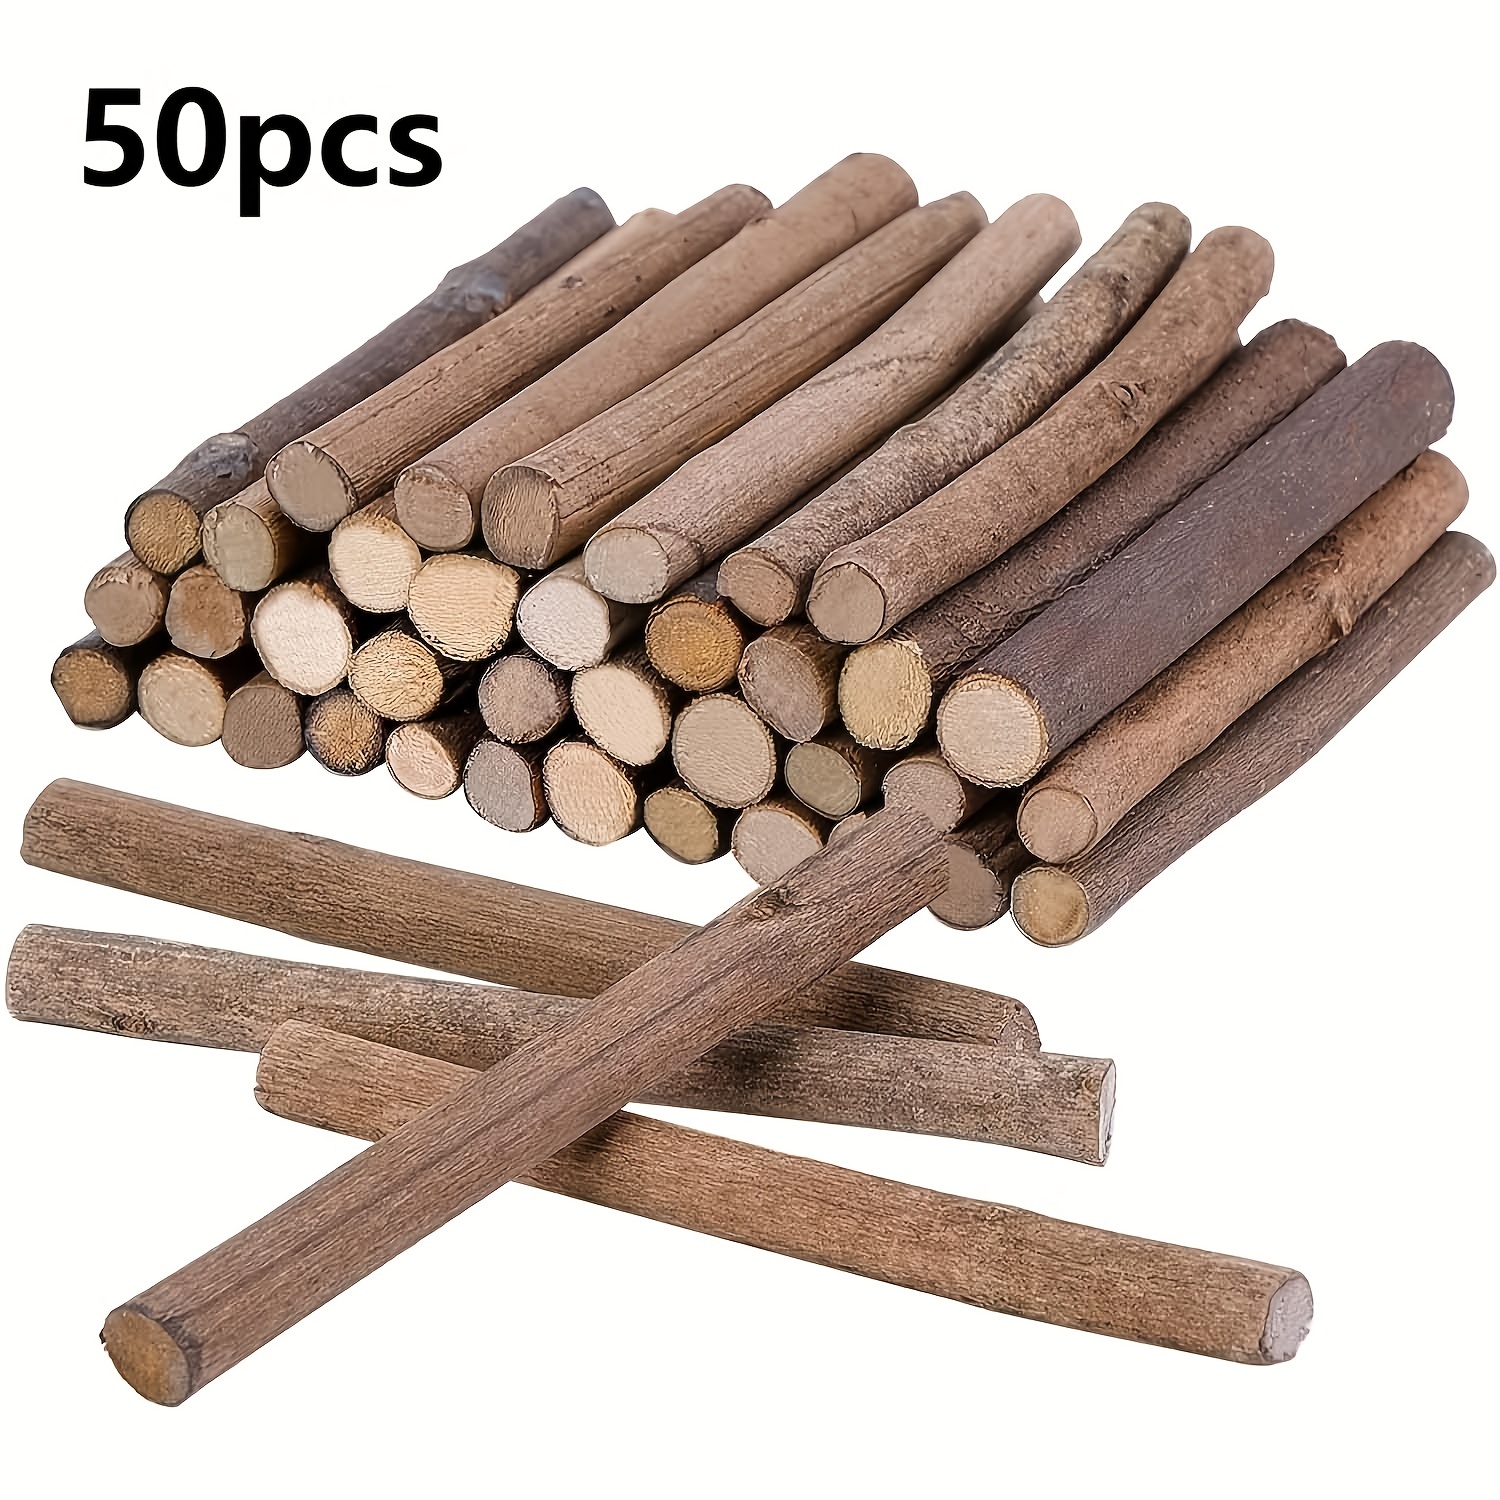 50Pcs Multi-size Wooden Square Round Wood Stick Rod for DIY Model Craft  Supplies